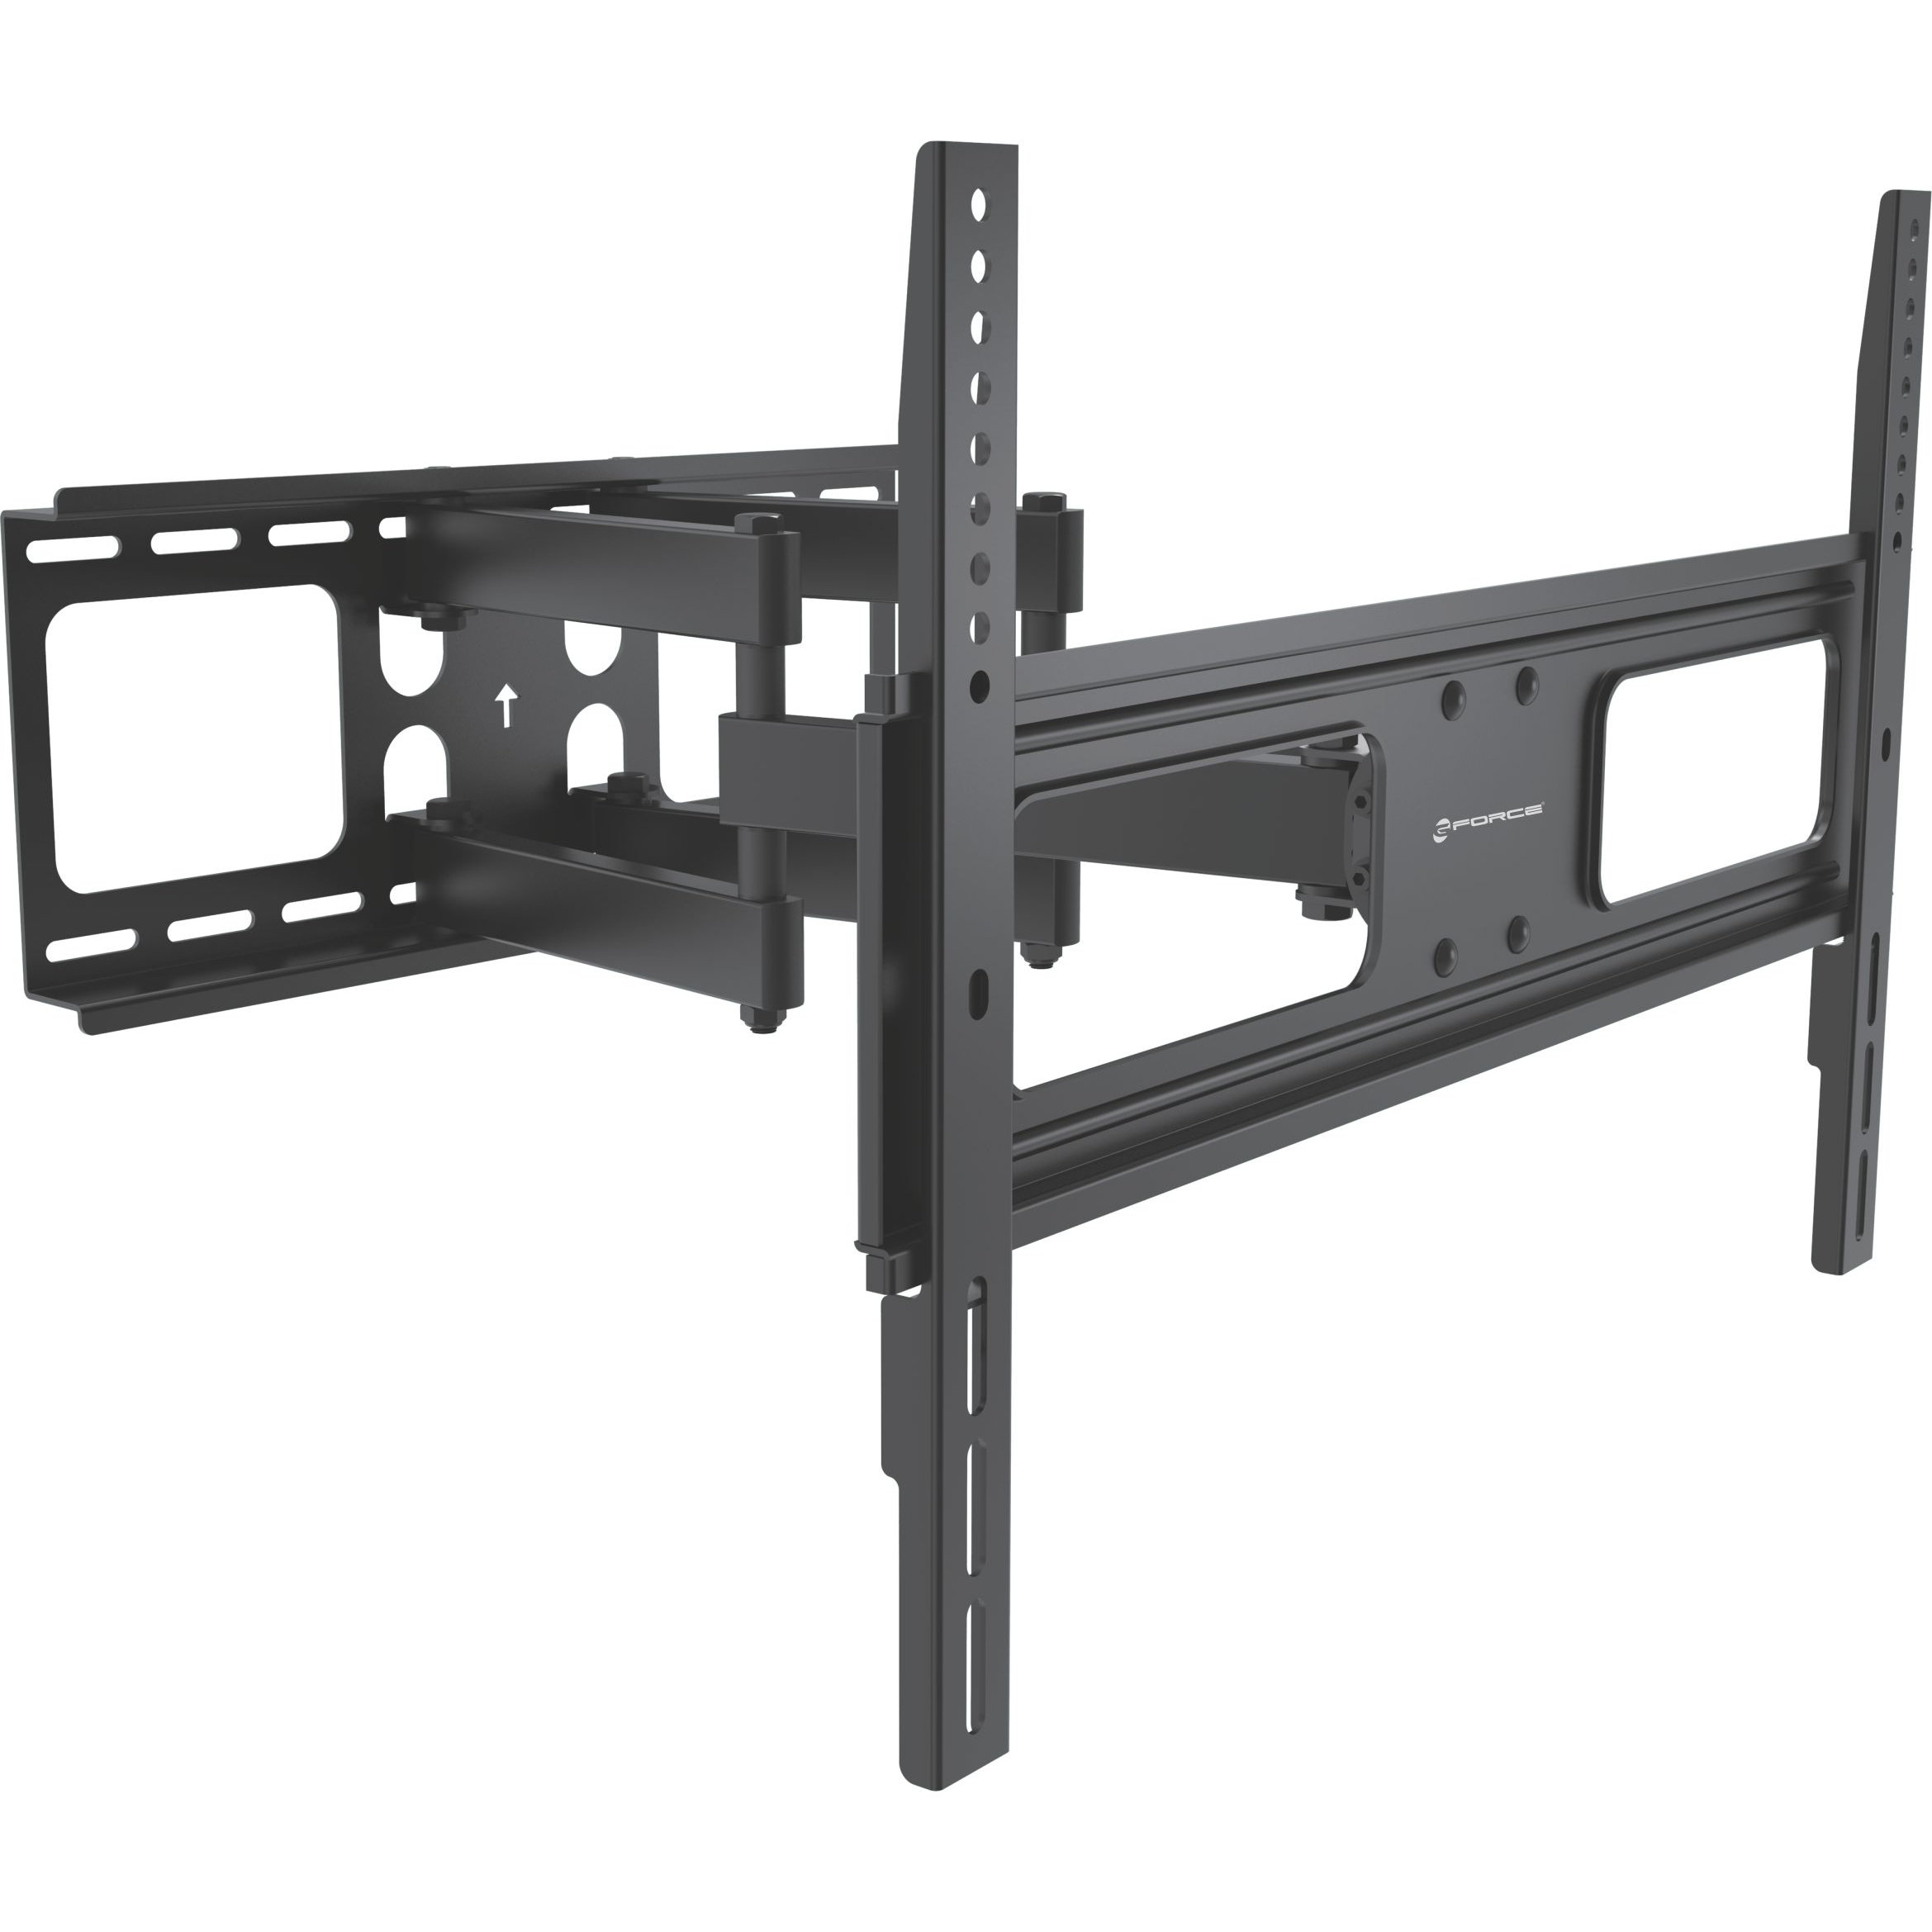 Full Motion TV Wall Mount For 32 55 Flat Panel Screens GF P1124 1110 